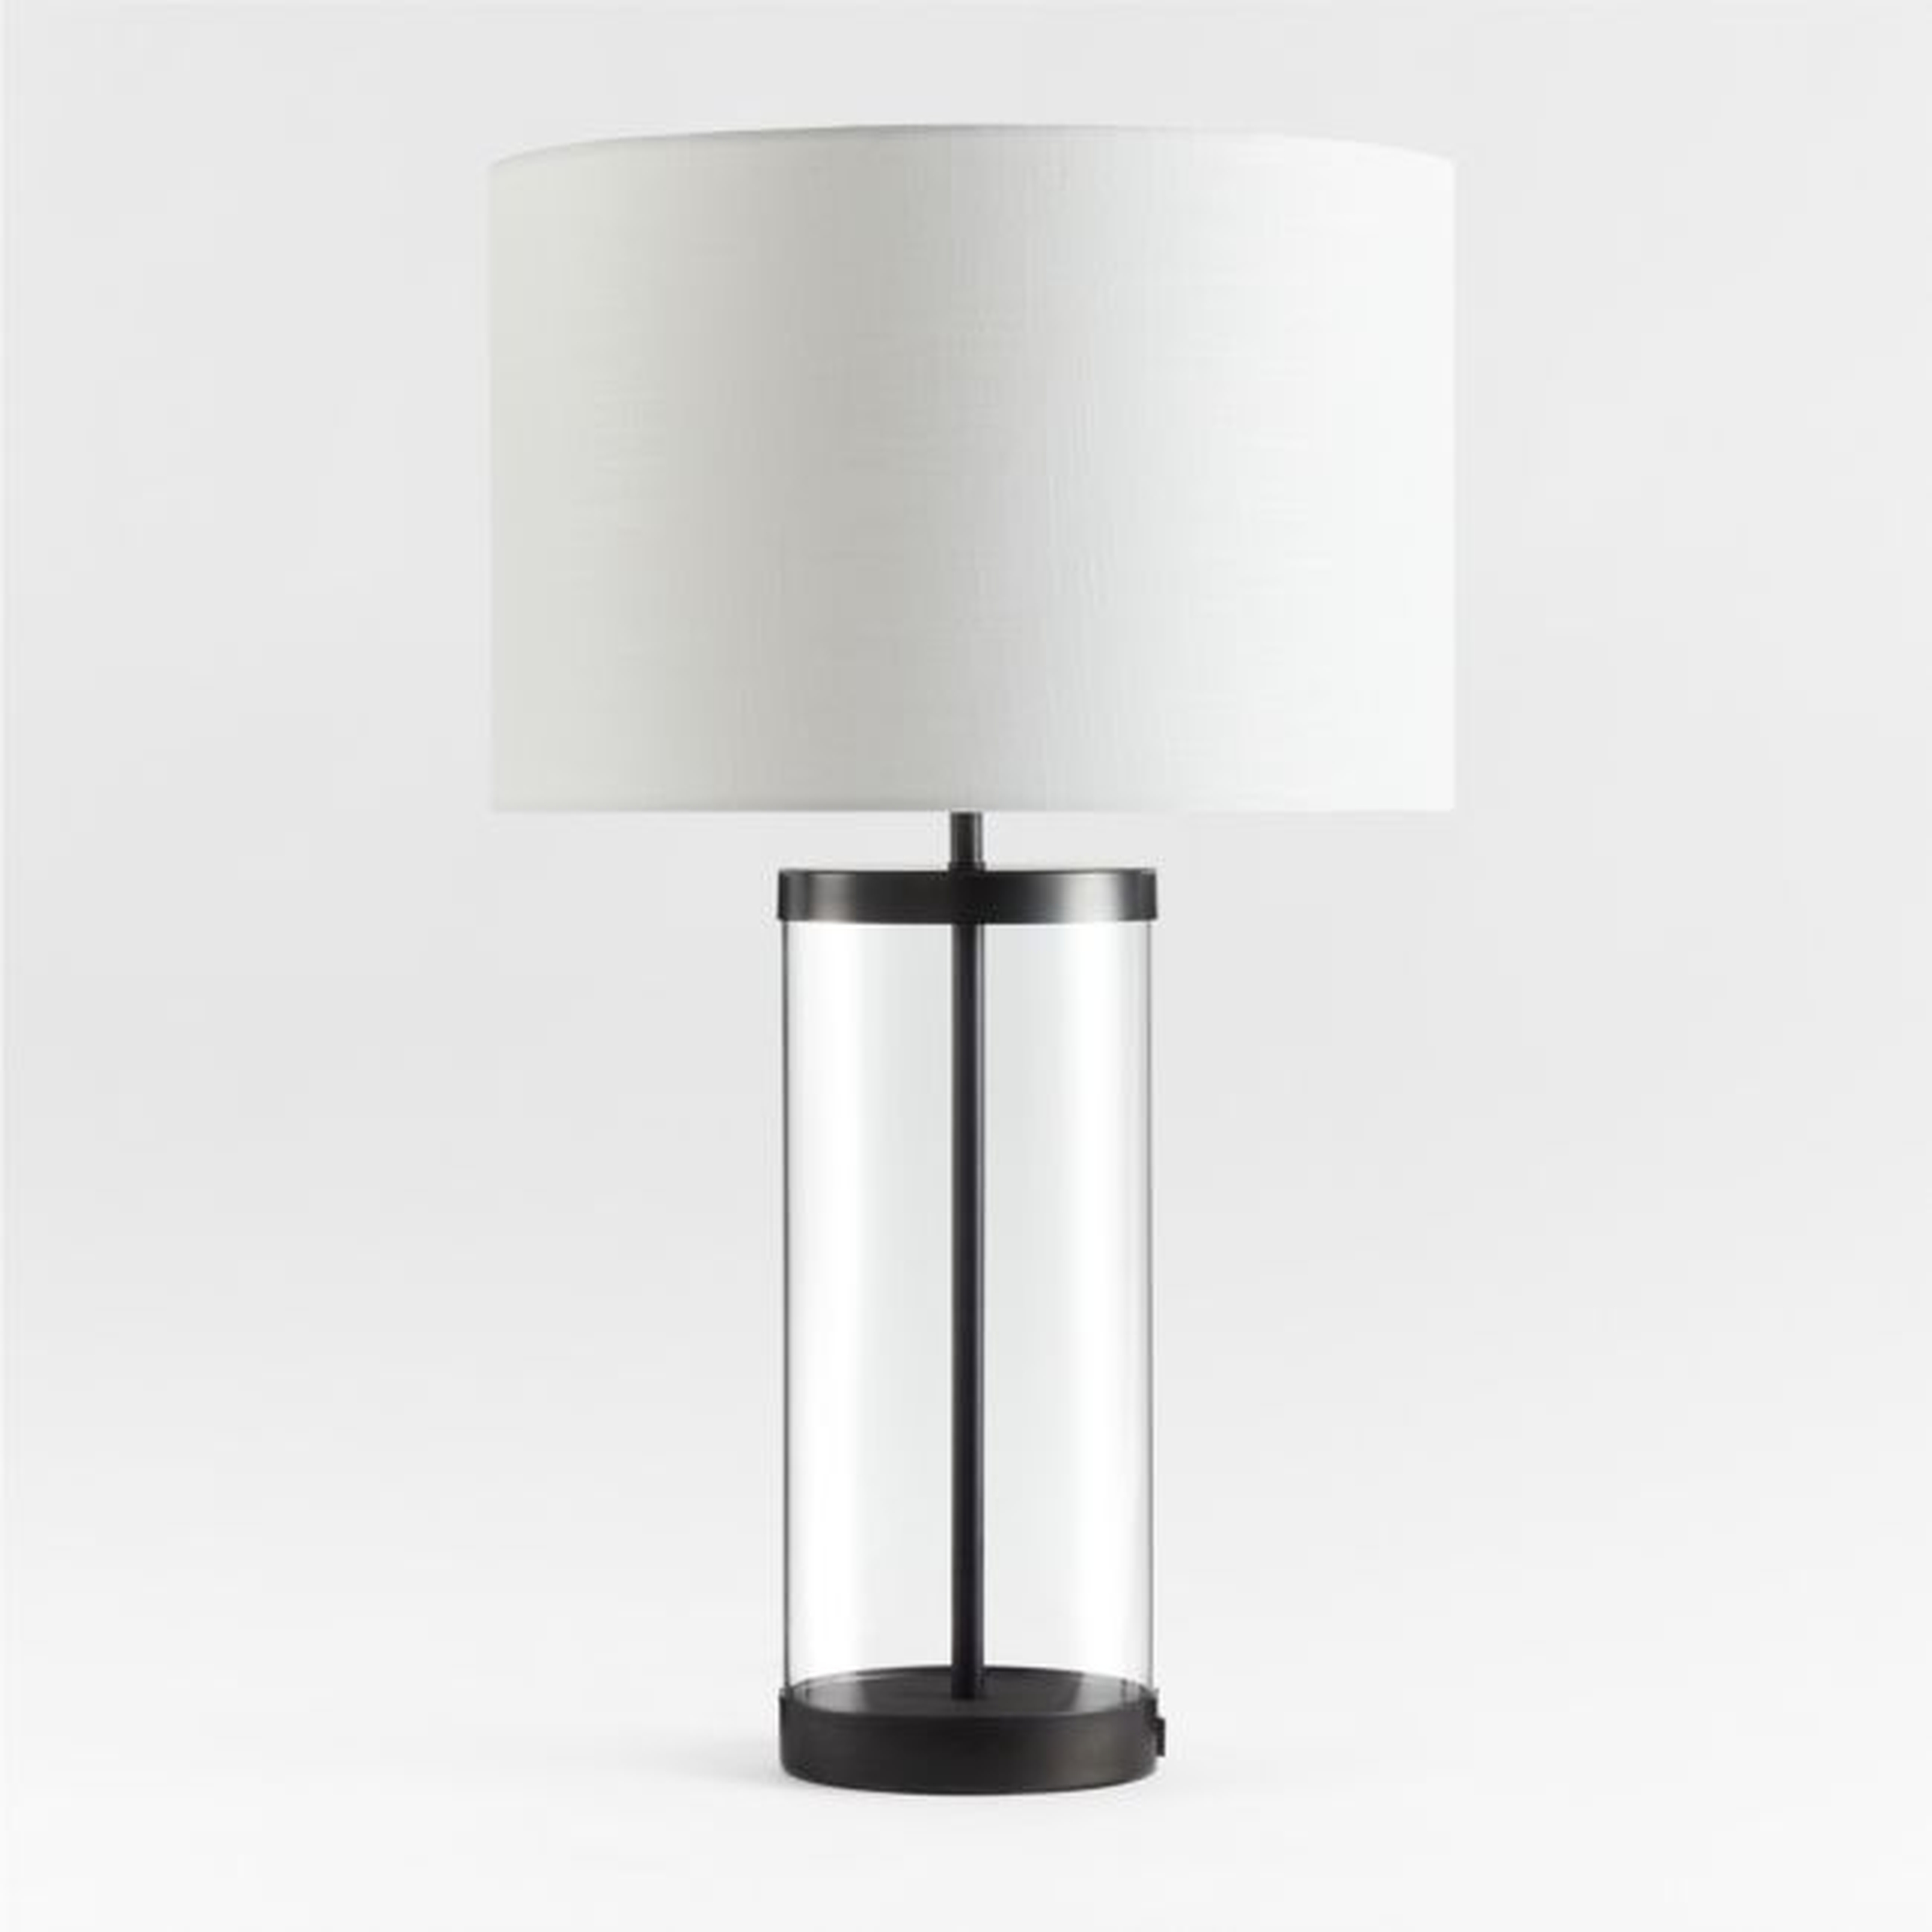 Promenade Black and Glass Table Lamp with White Shade - Crate and Barrel